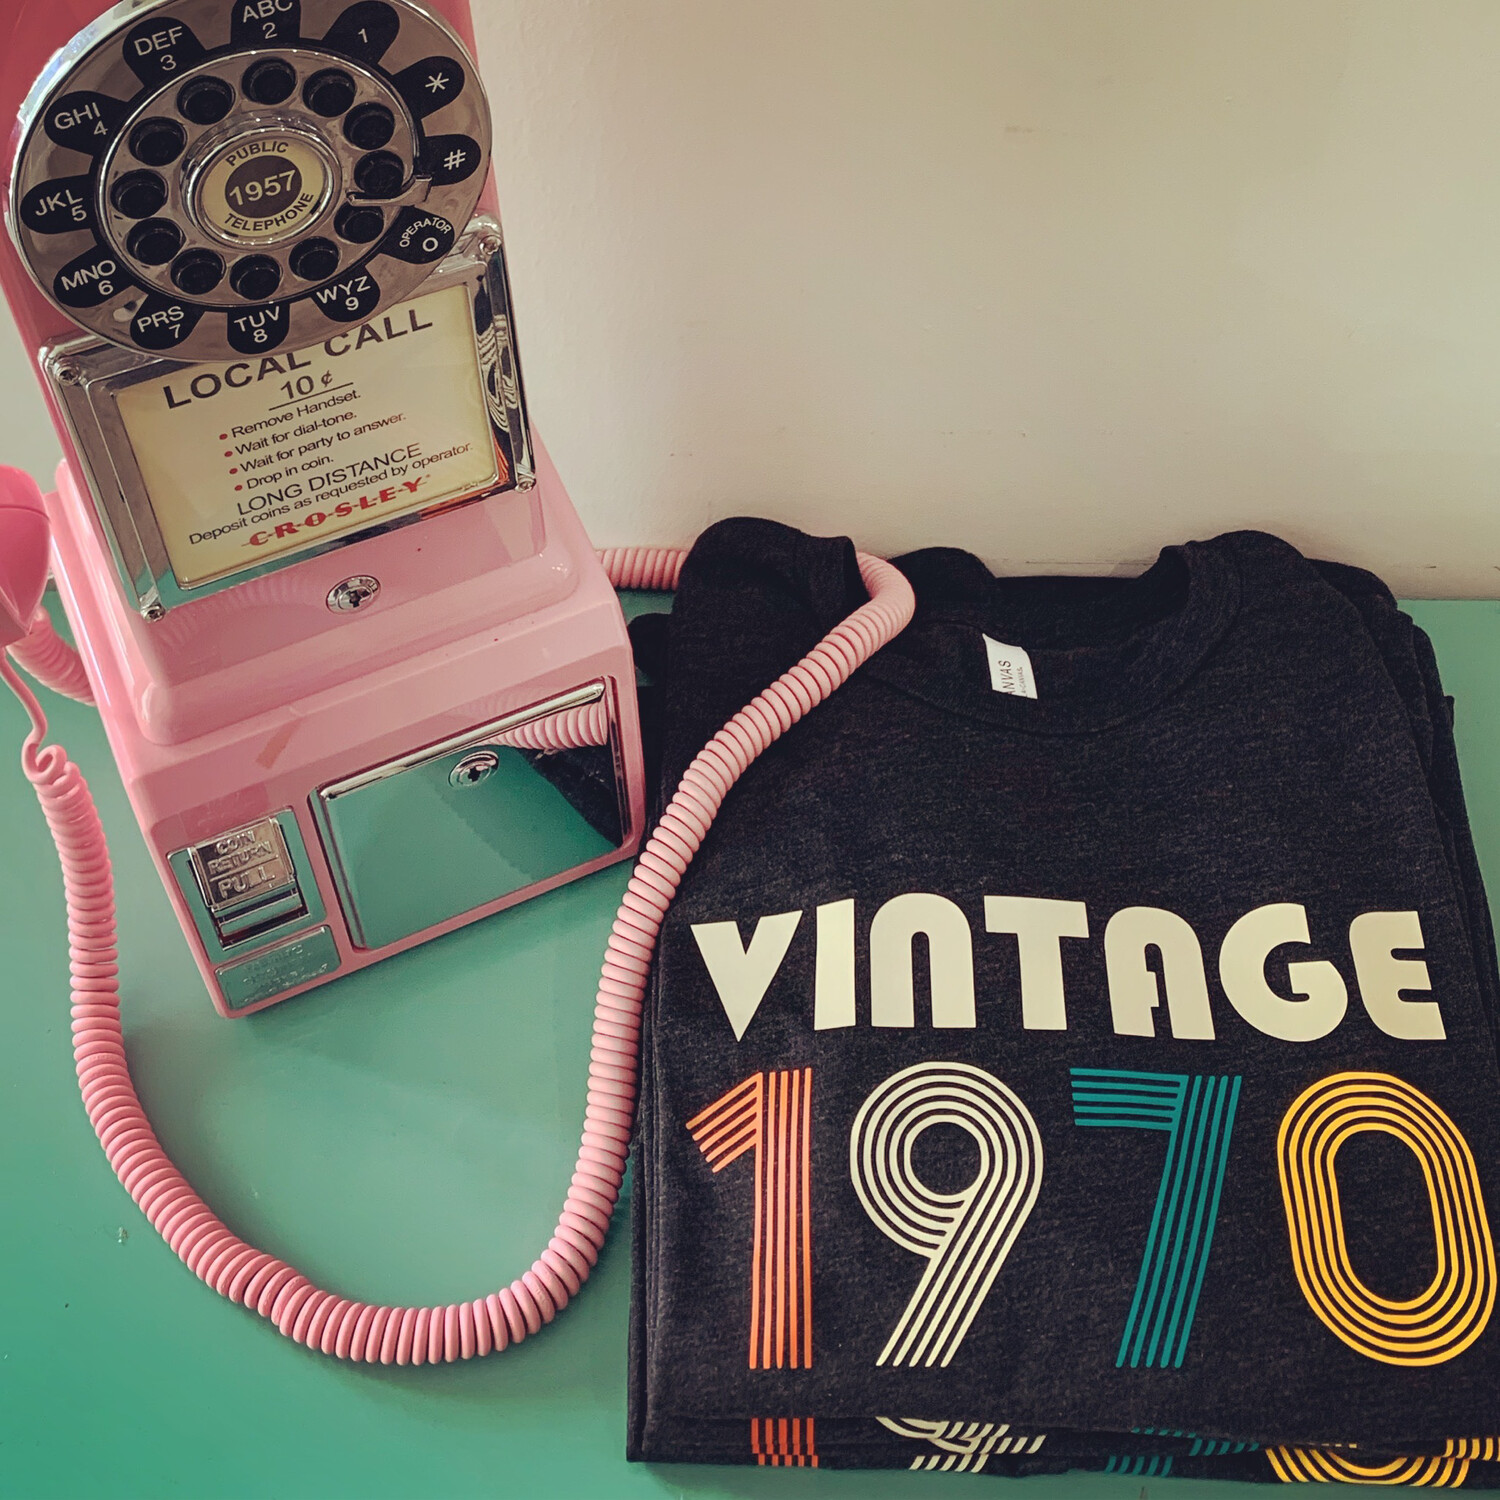 Vintage Birthday Tee - Customized To Your Year!